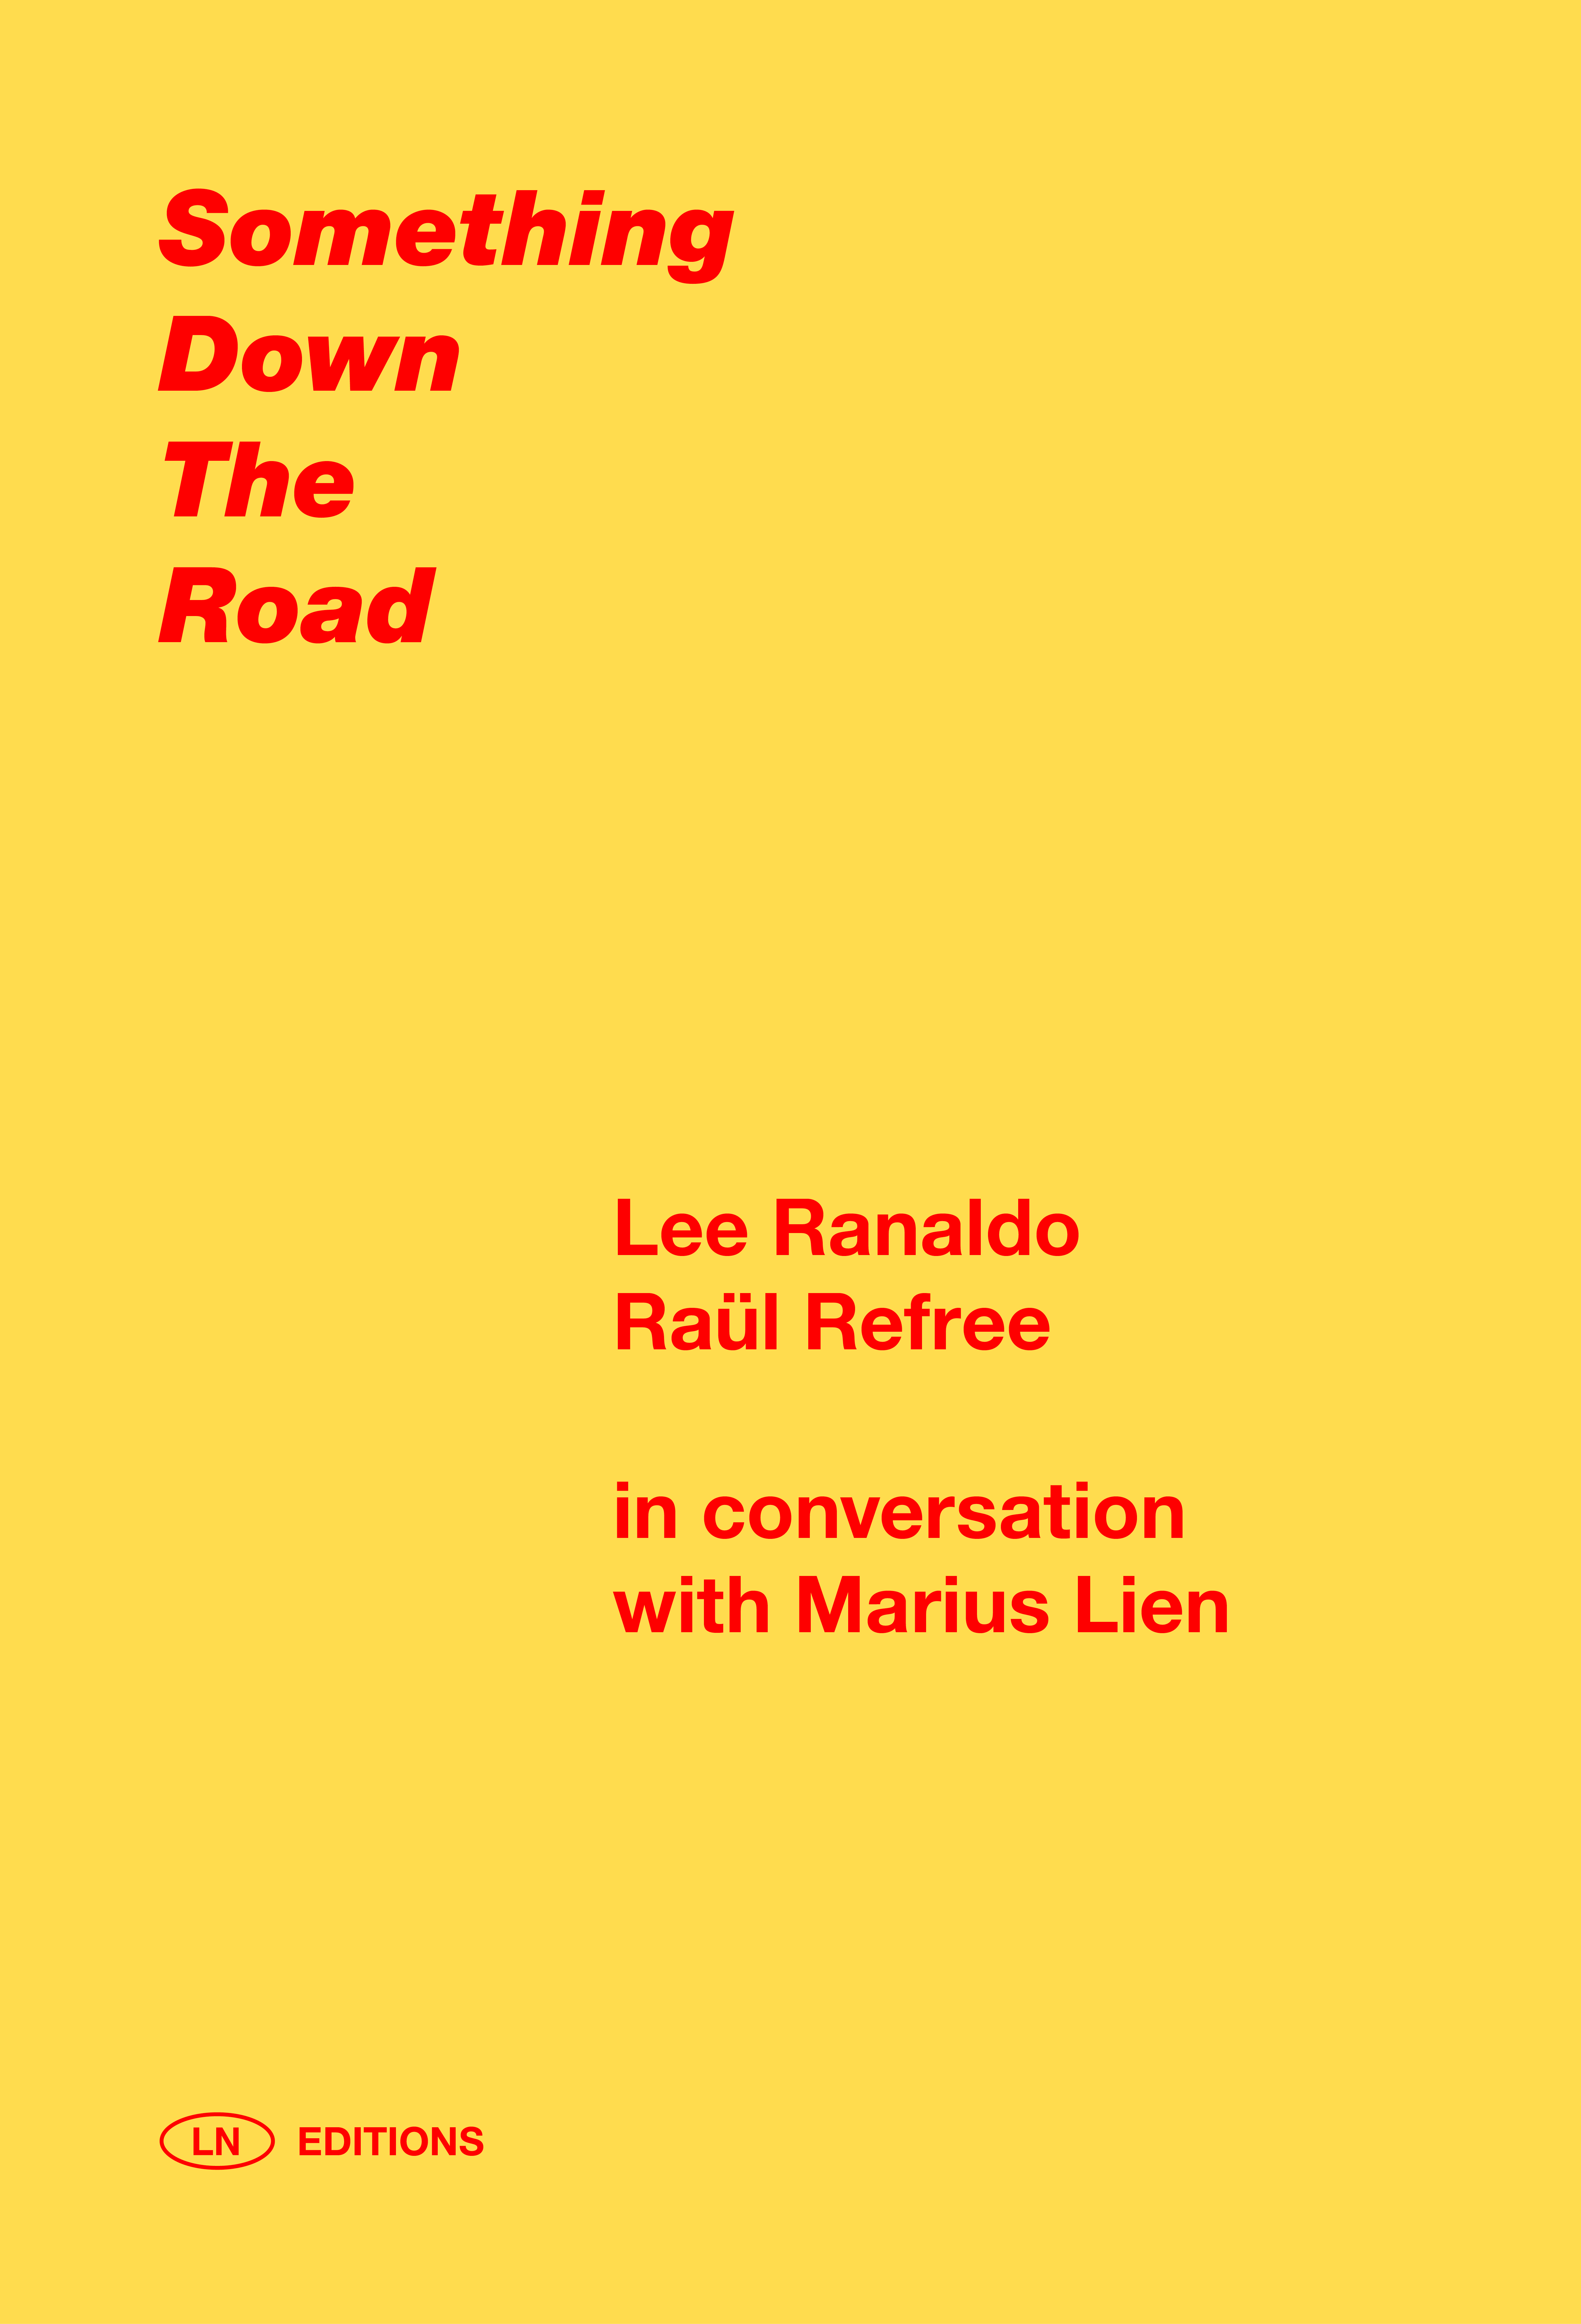 Something Down the Road: Lee Ranaldo & Raül Refree in Conversation with Marius Lien